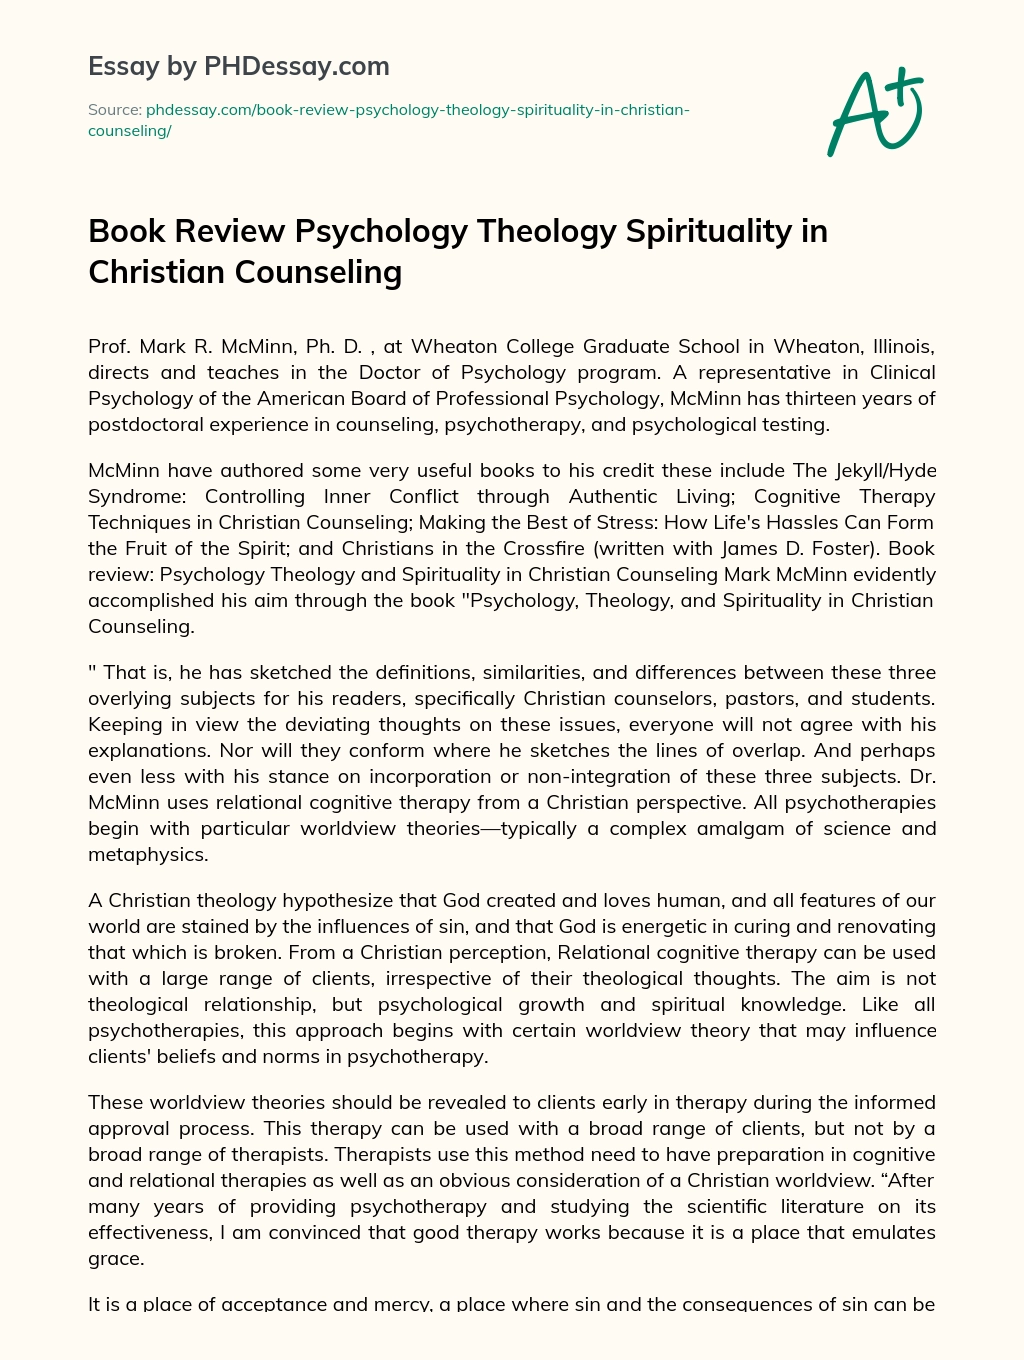 Book Review Psychology Theology Spirituality in Christian Counseling essay